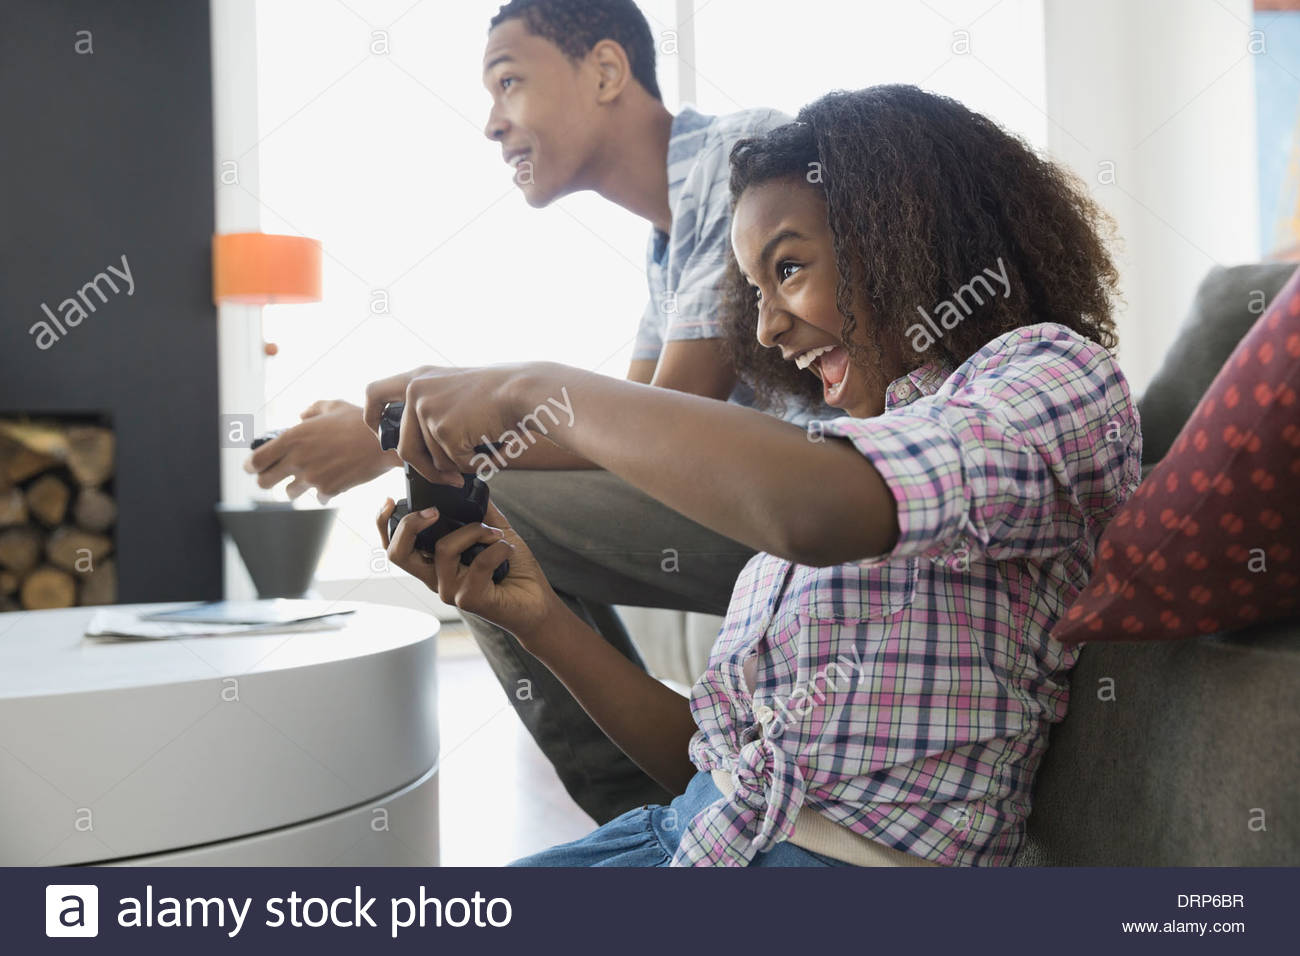 Siblings playing video games at home Stock Photo